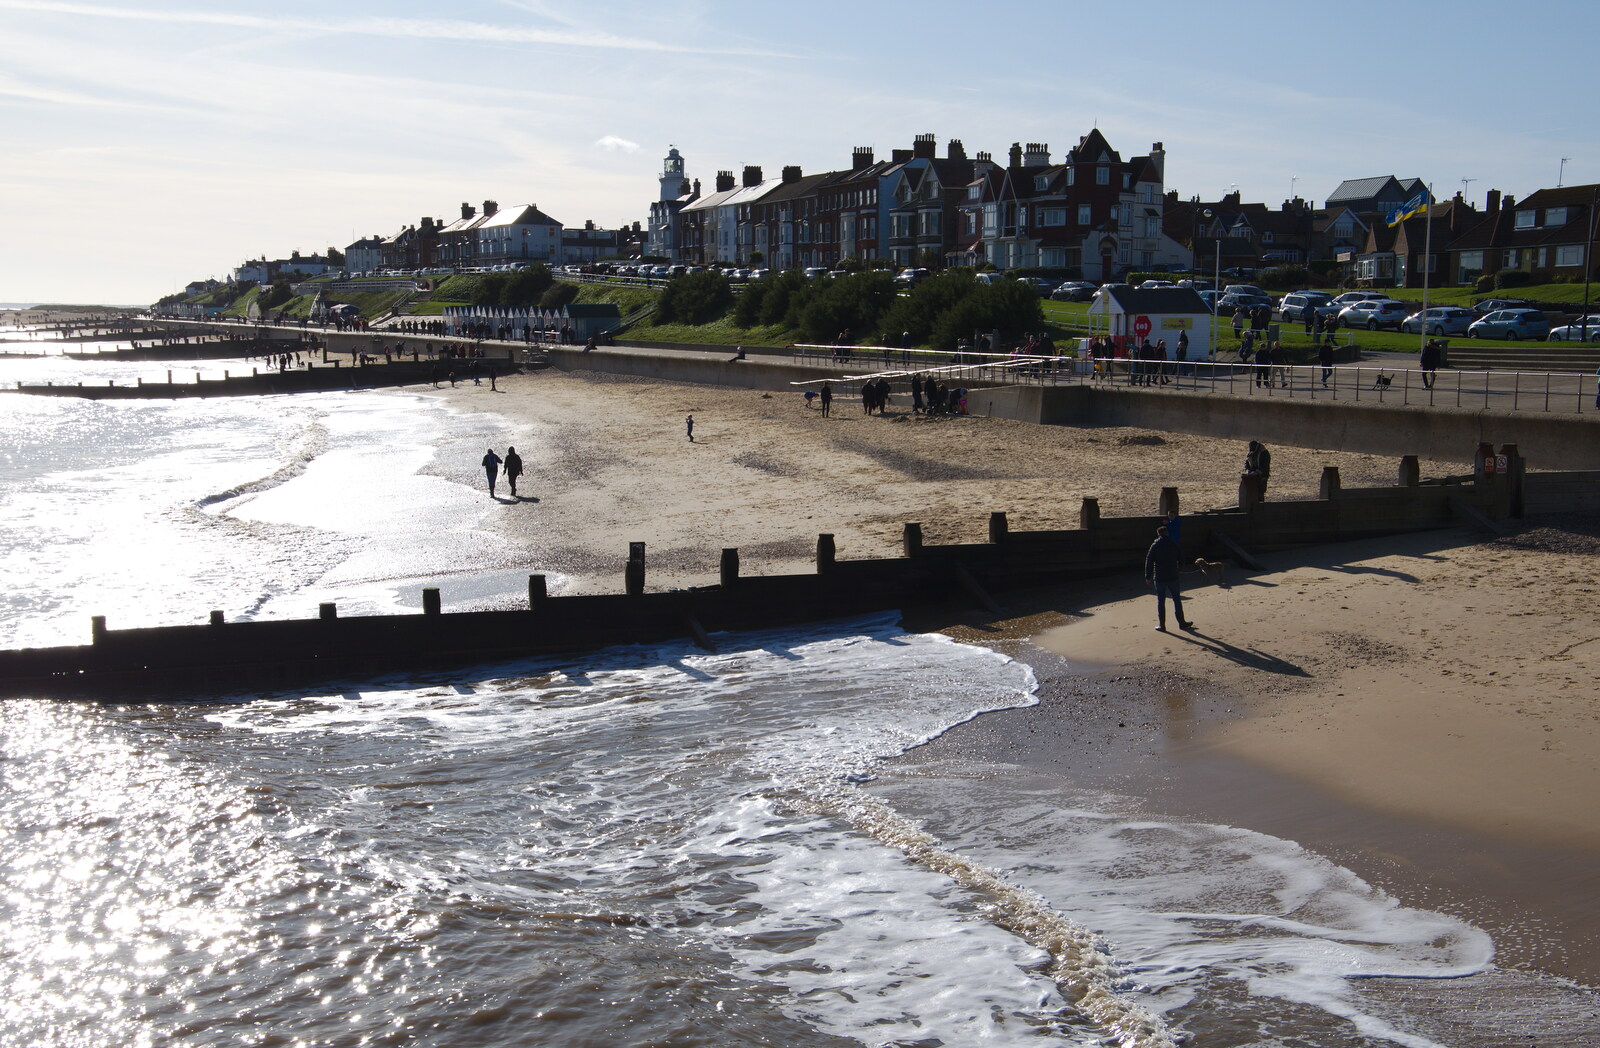 People on the beach at Southwold from A Trip up a Lighthouse, Southwold, Suffolk - 27th October 2019